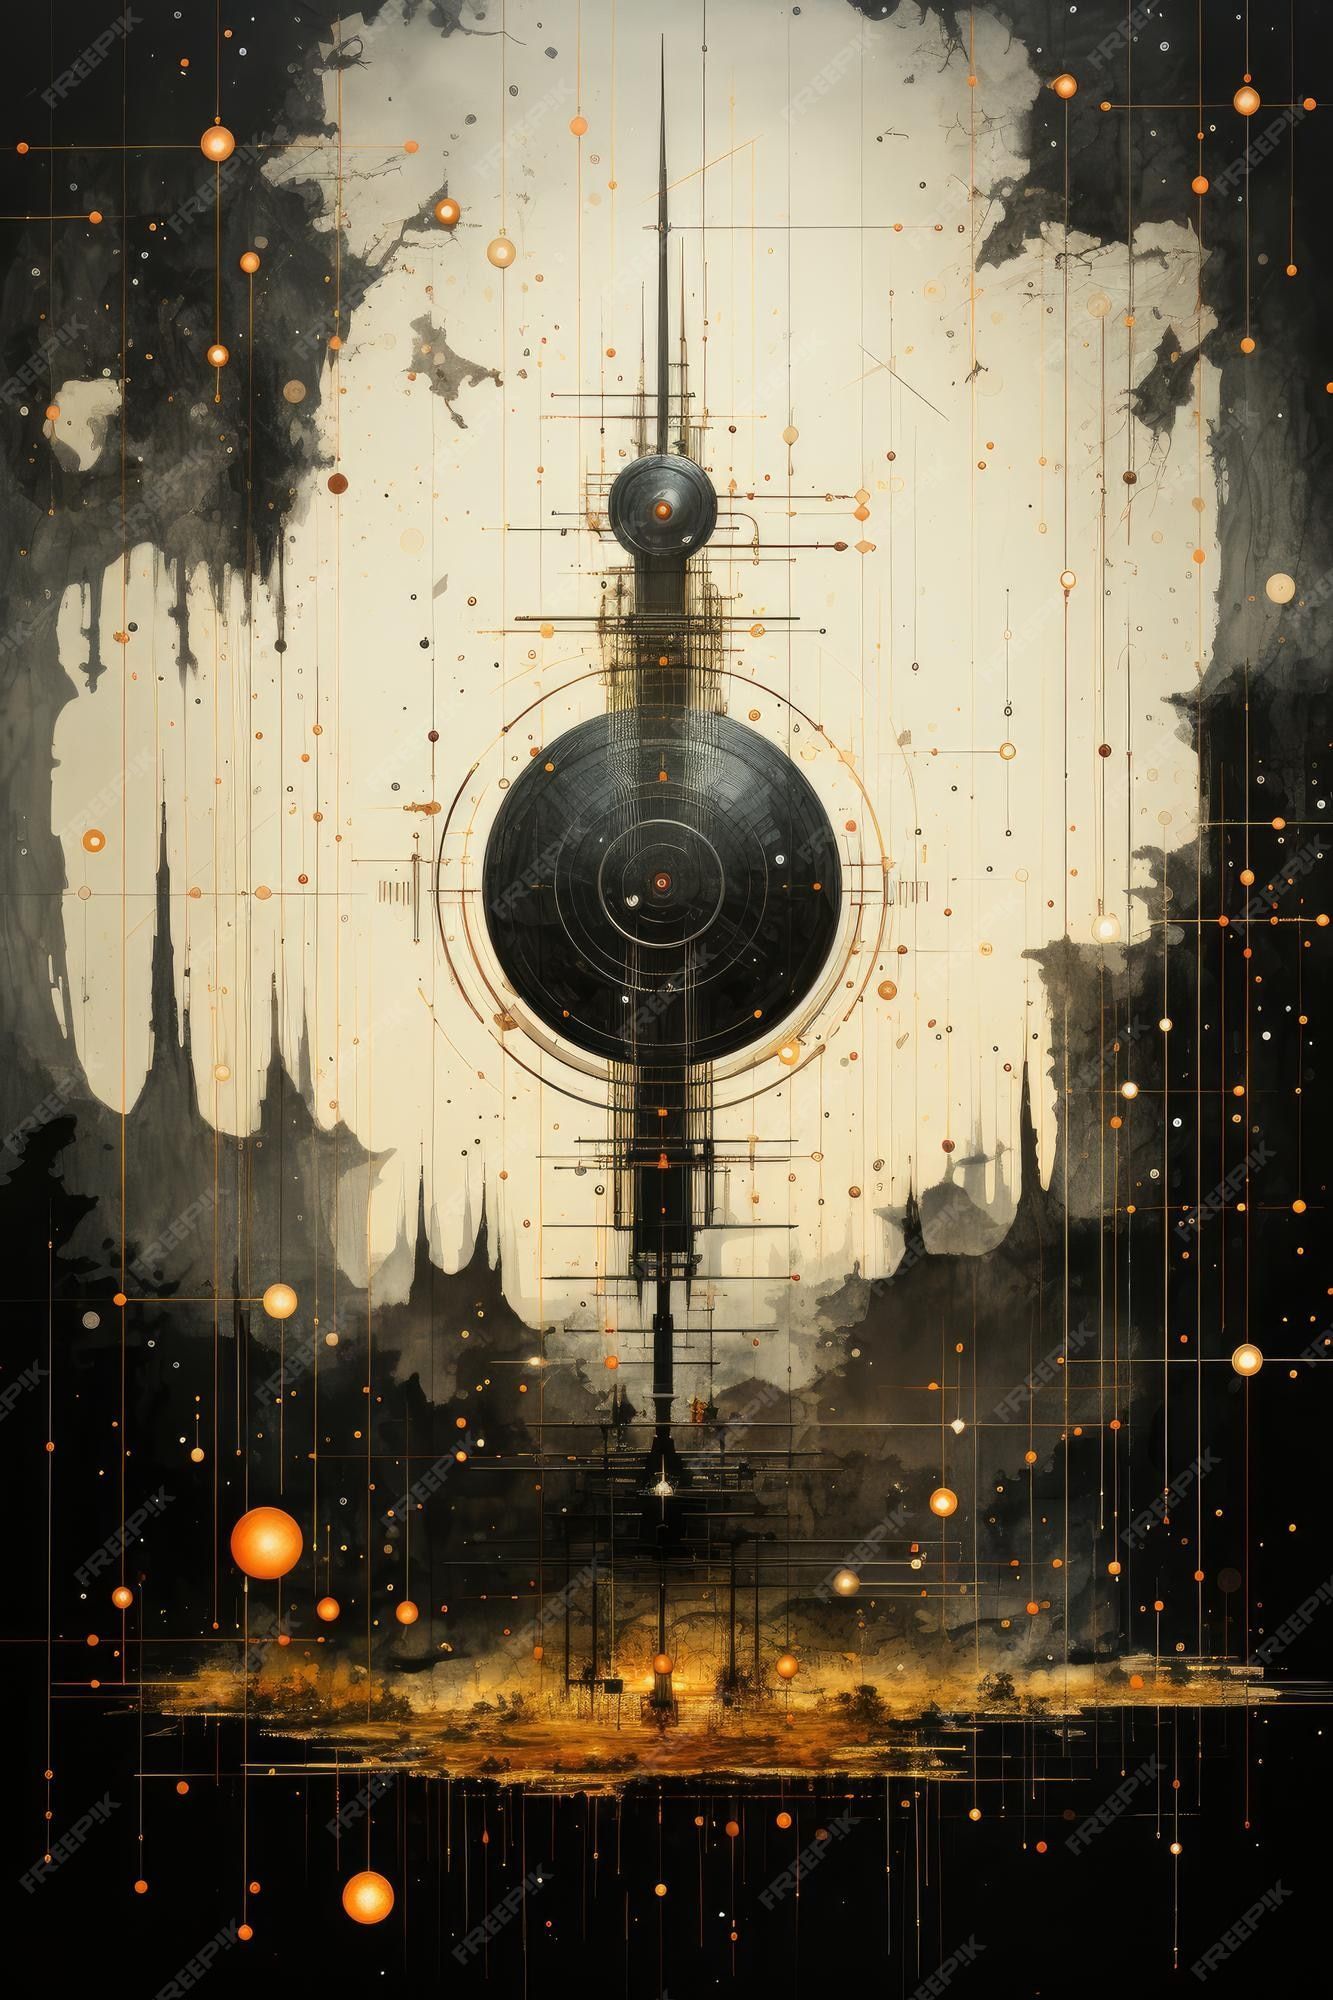 Digital painting of a space station in the clouds - Steampunk